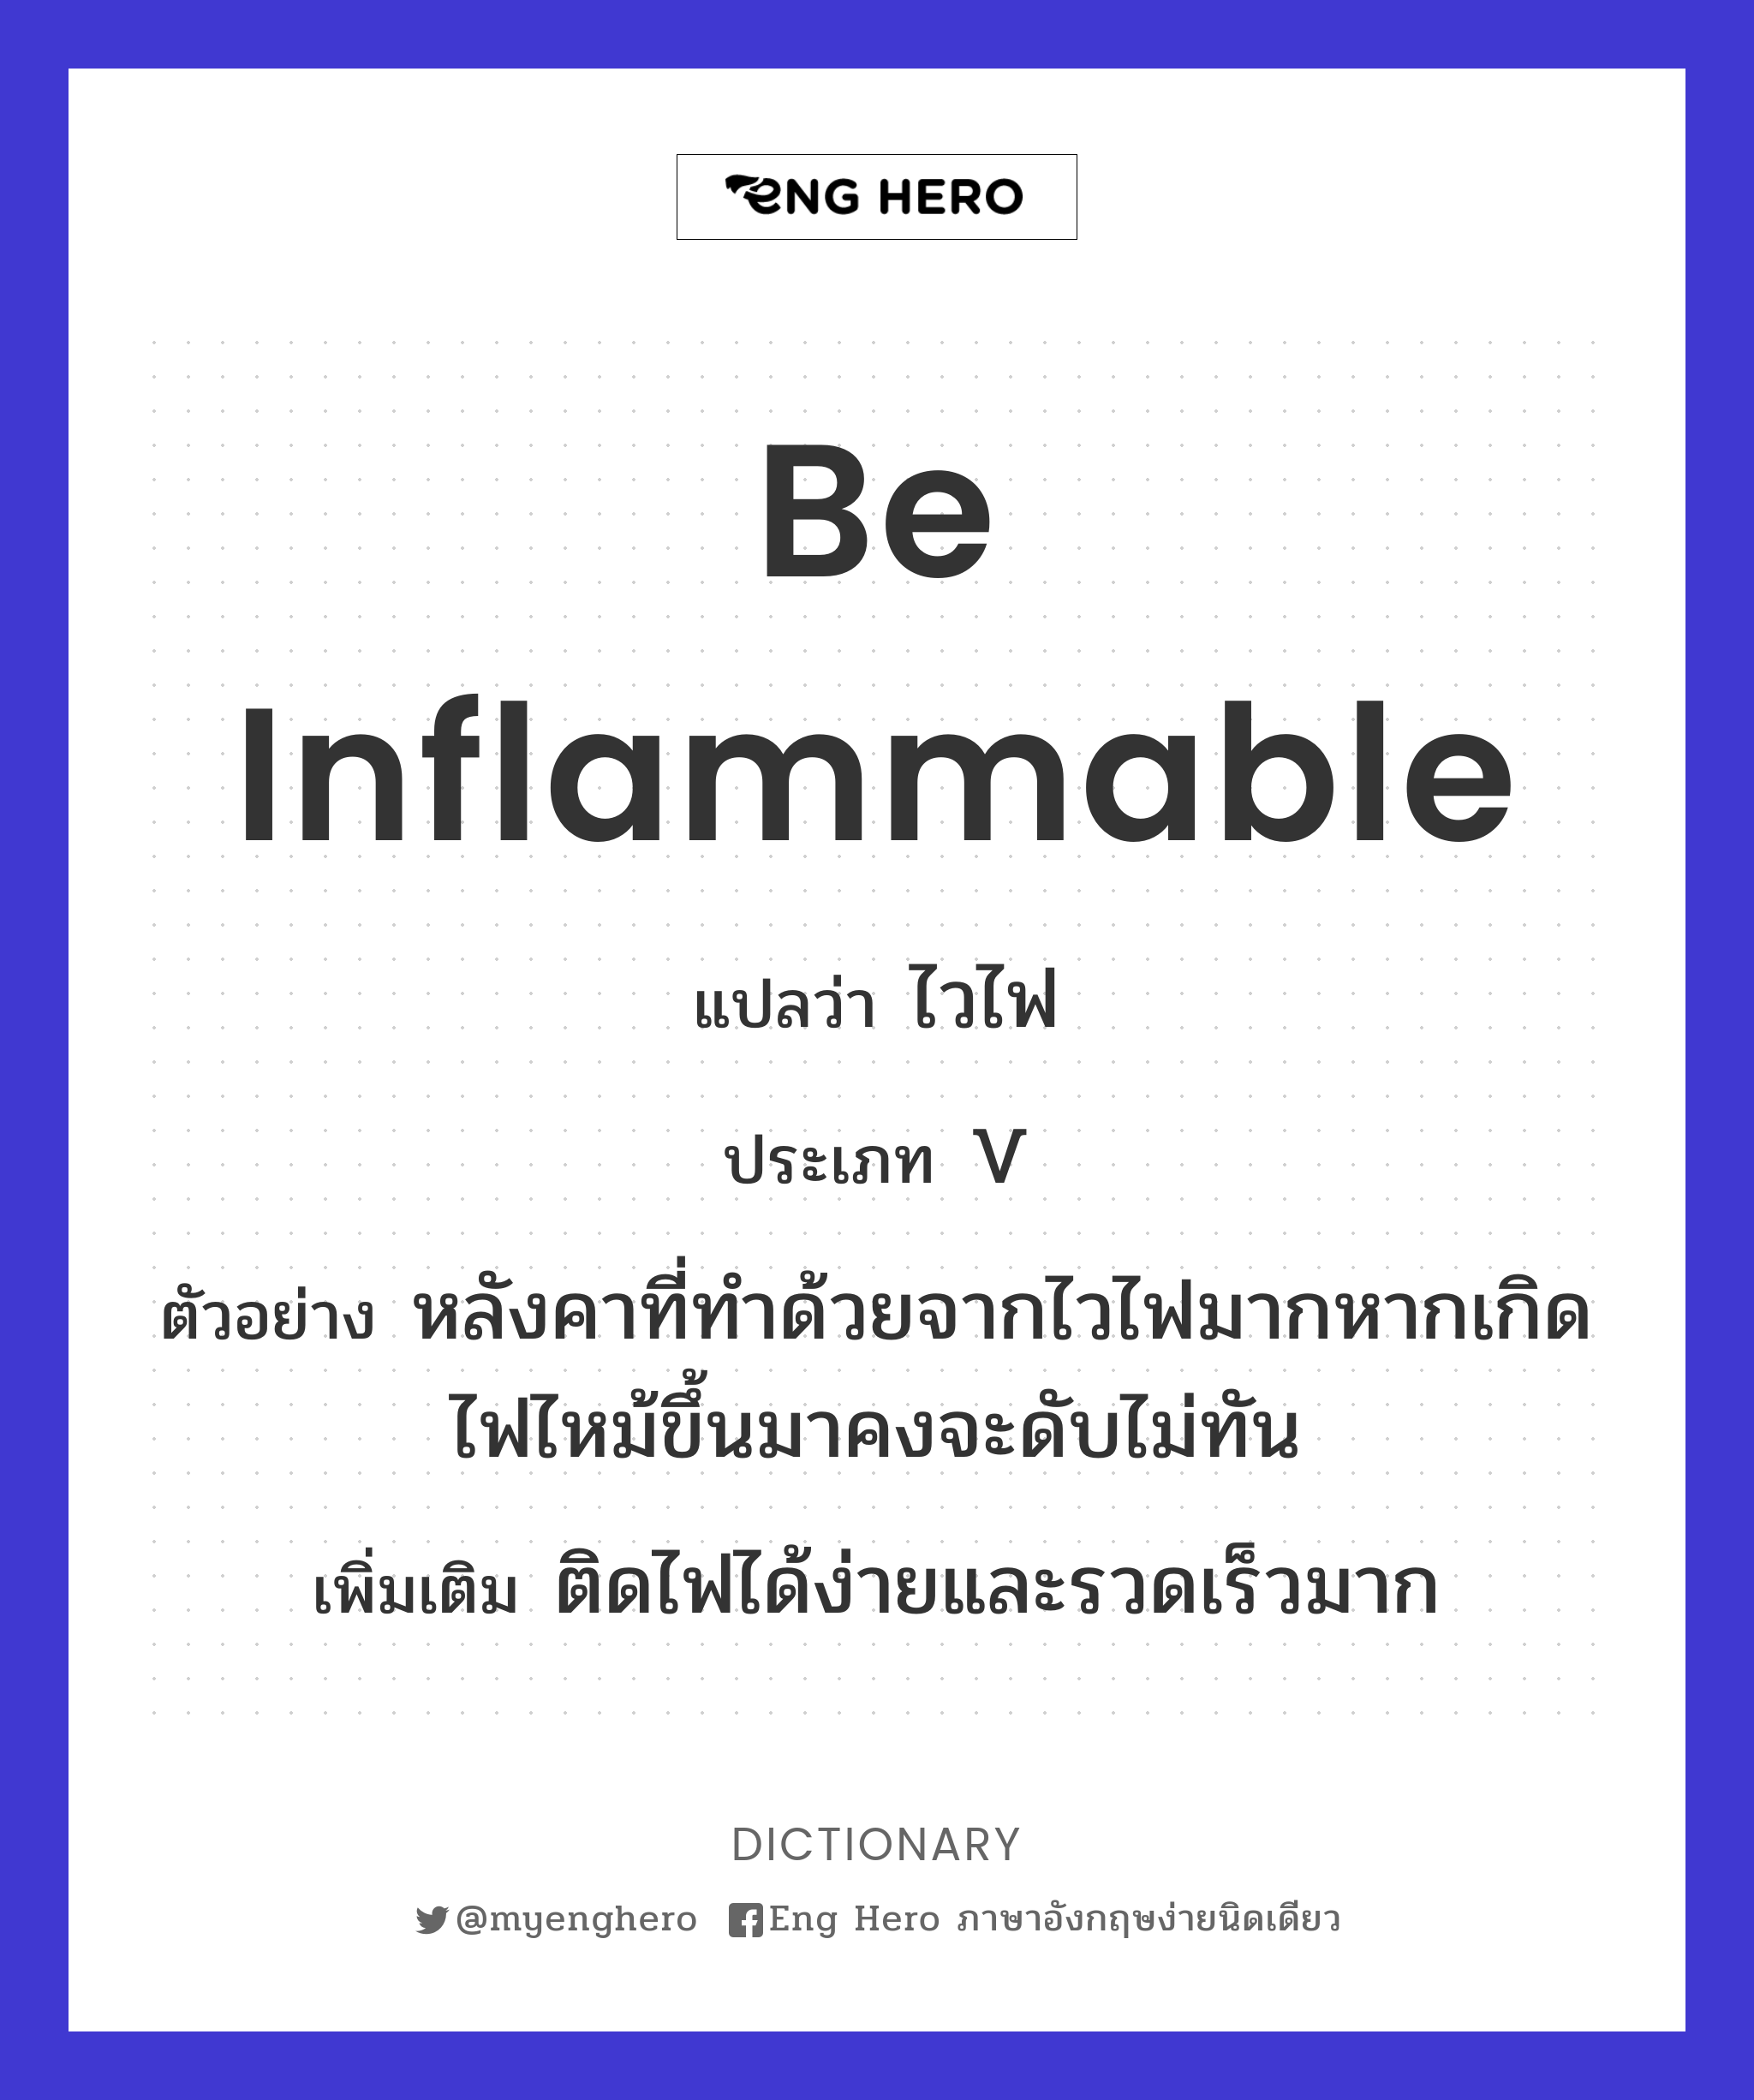 be inflammable